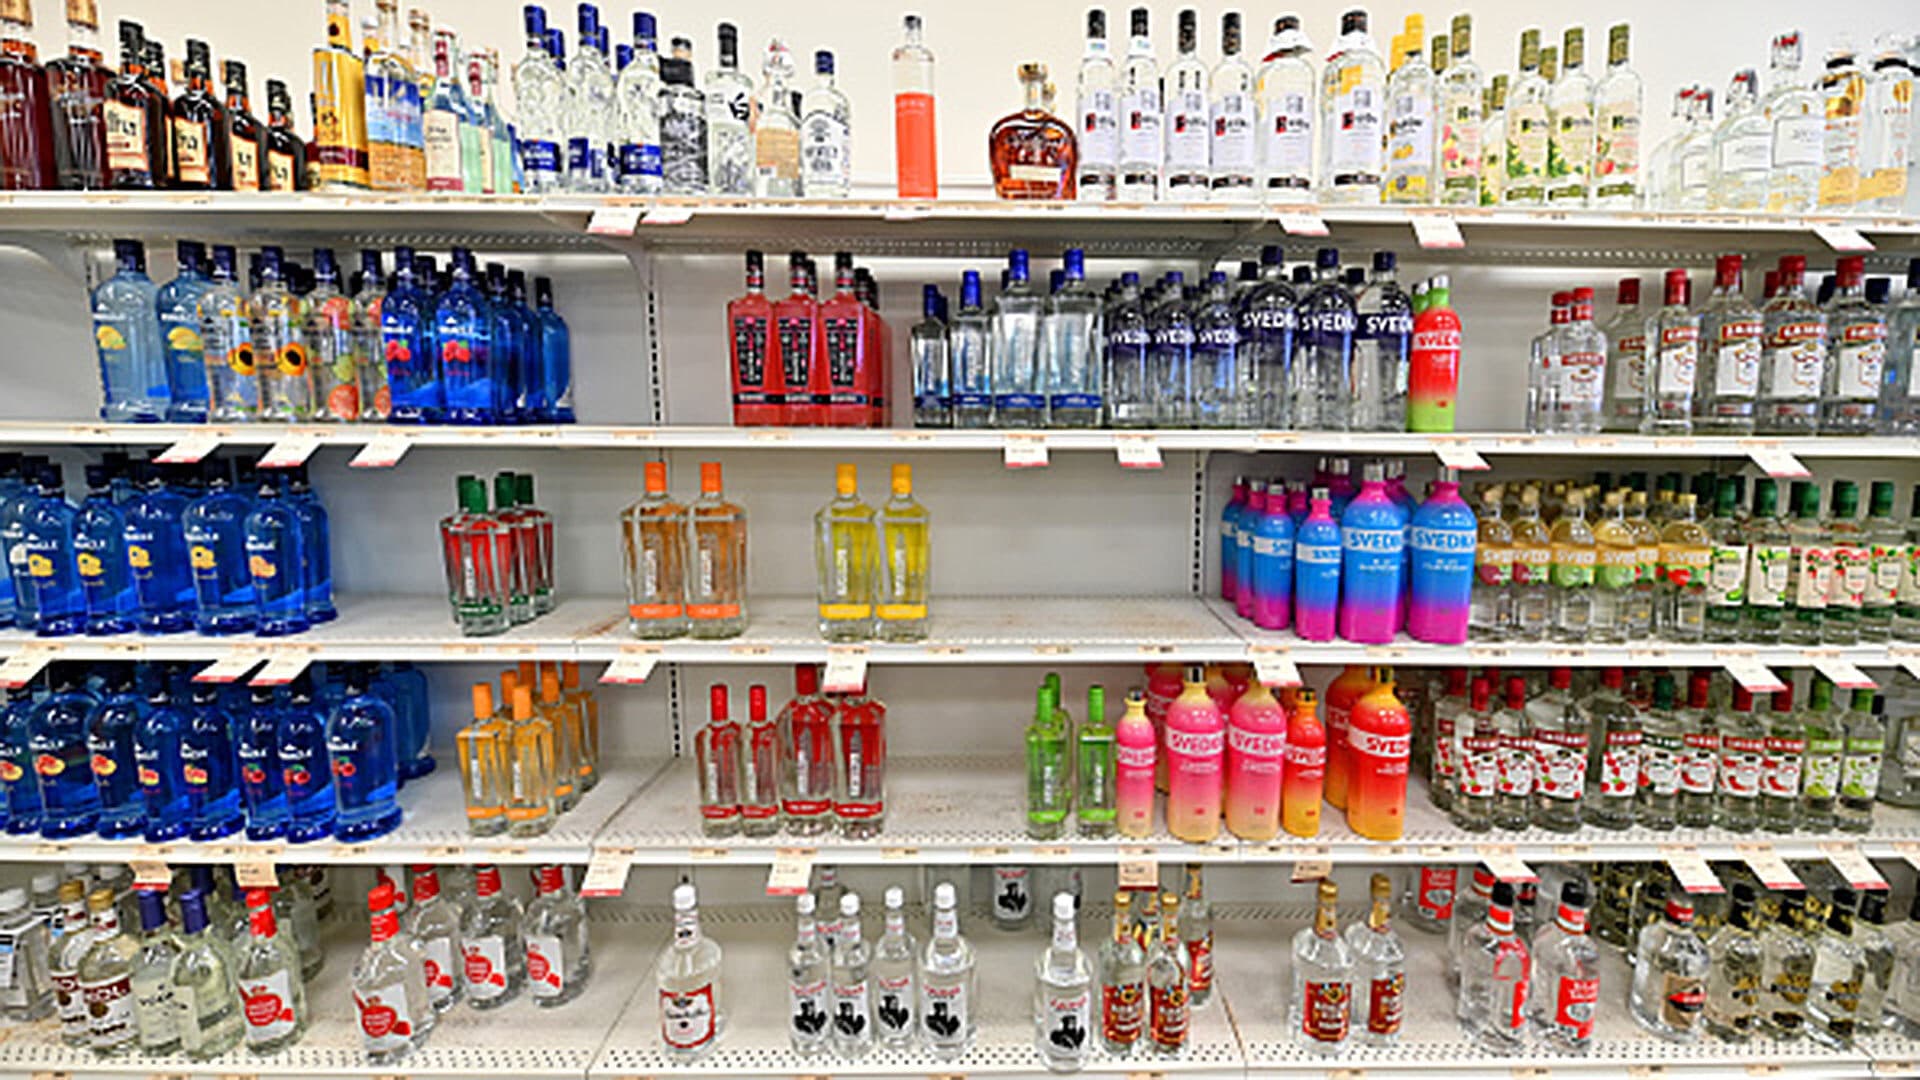 Shelves of vodka with spaces where Russian brands were removed